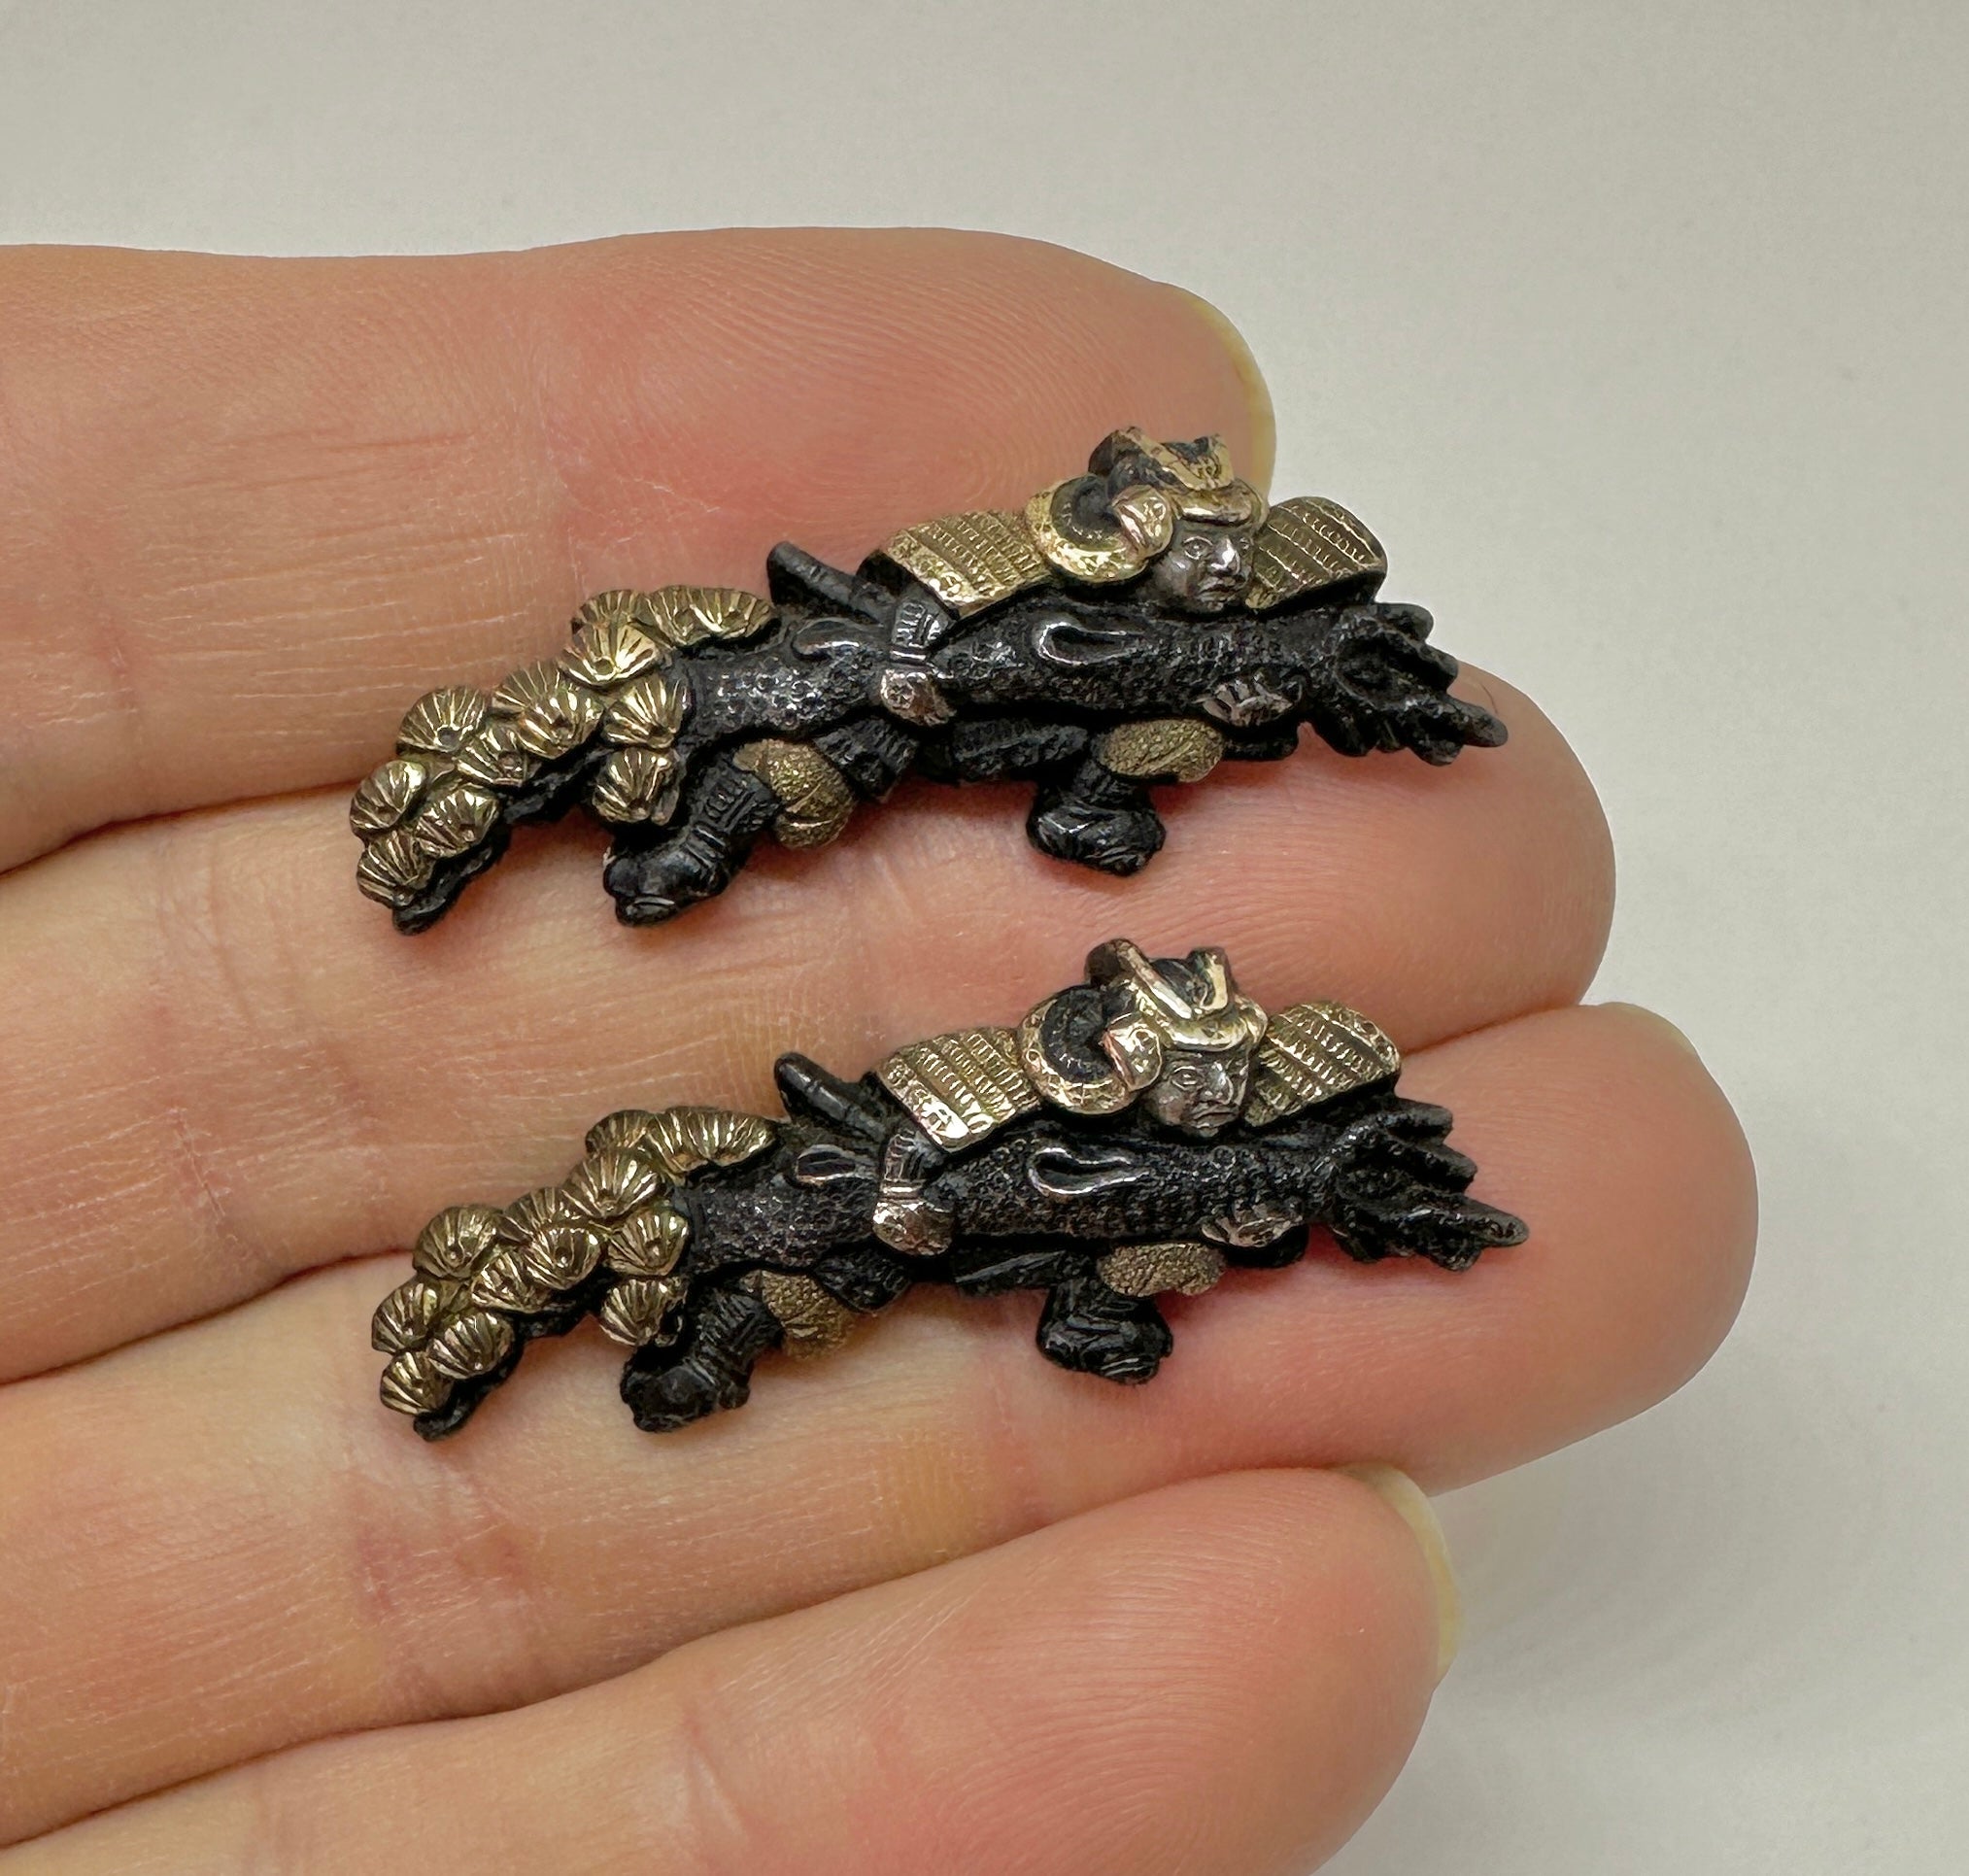 This is a very rare pair of Antique Victorian Shakudo Brooch Pins from Japan depicting a Samurai Warrior holding a Sea Dragon swimming through Lily Pads.  The extraordinary imagery is full of history, drama and mystique.  The dragons are wonderful,